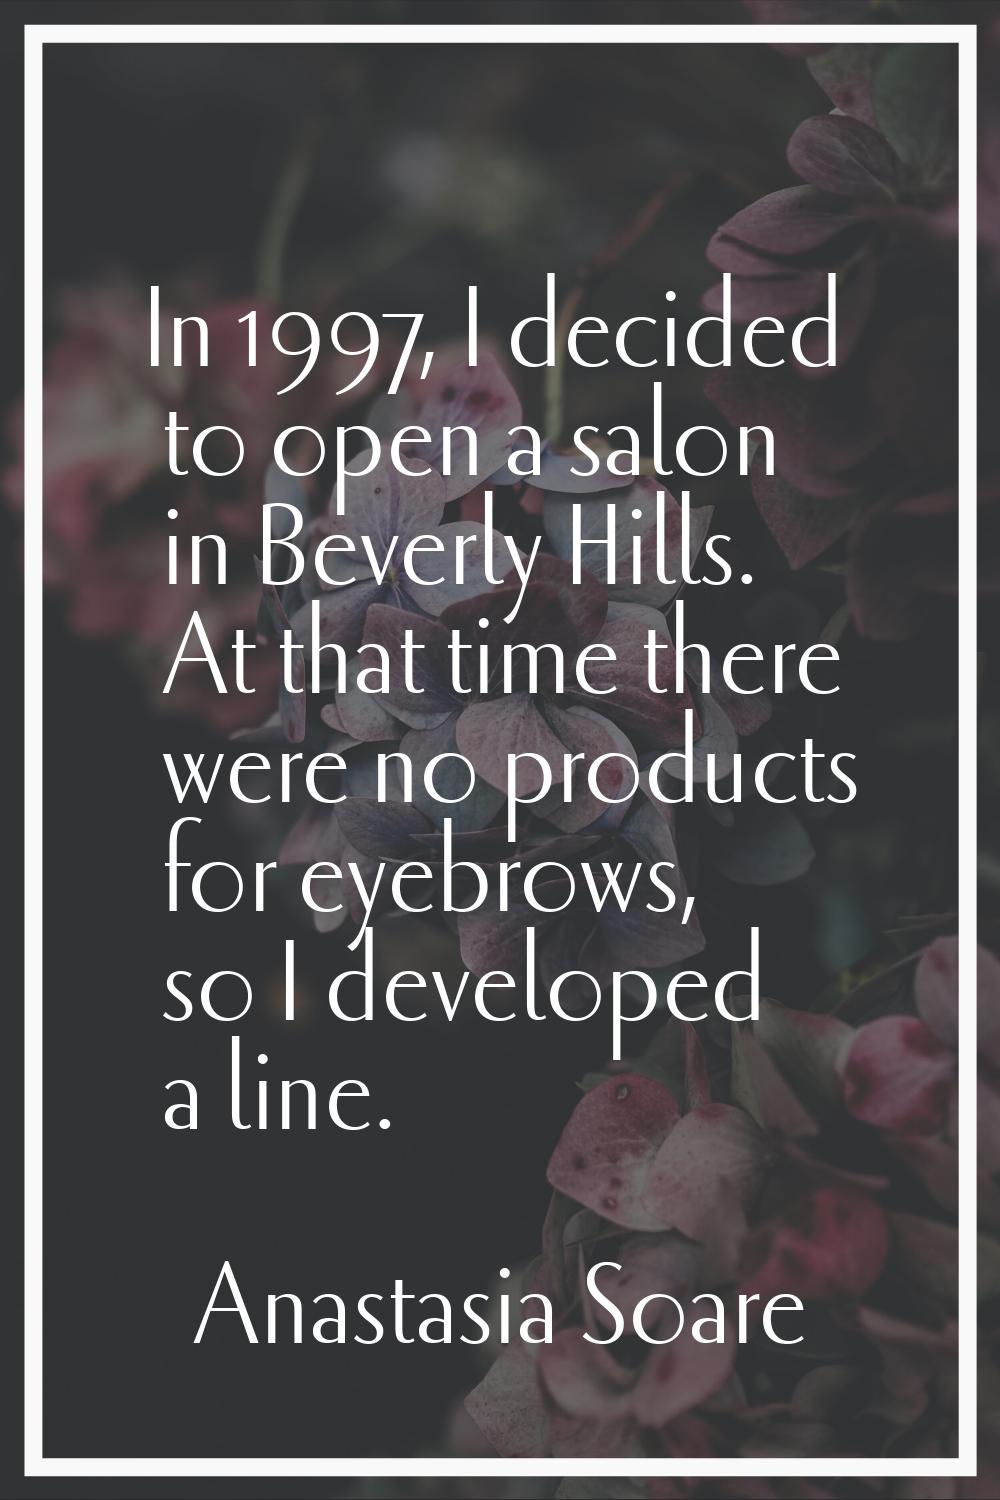 In 1997, I decided to open a salon in Beverly Hills. At that time there were no products for eyebro